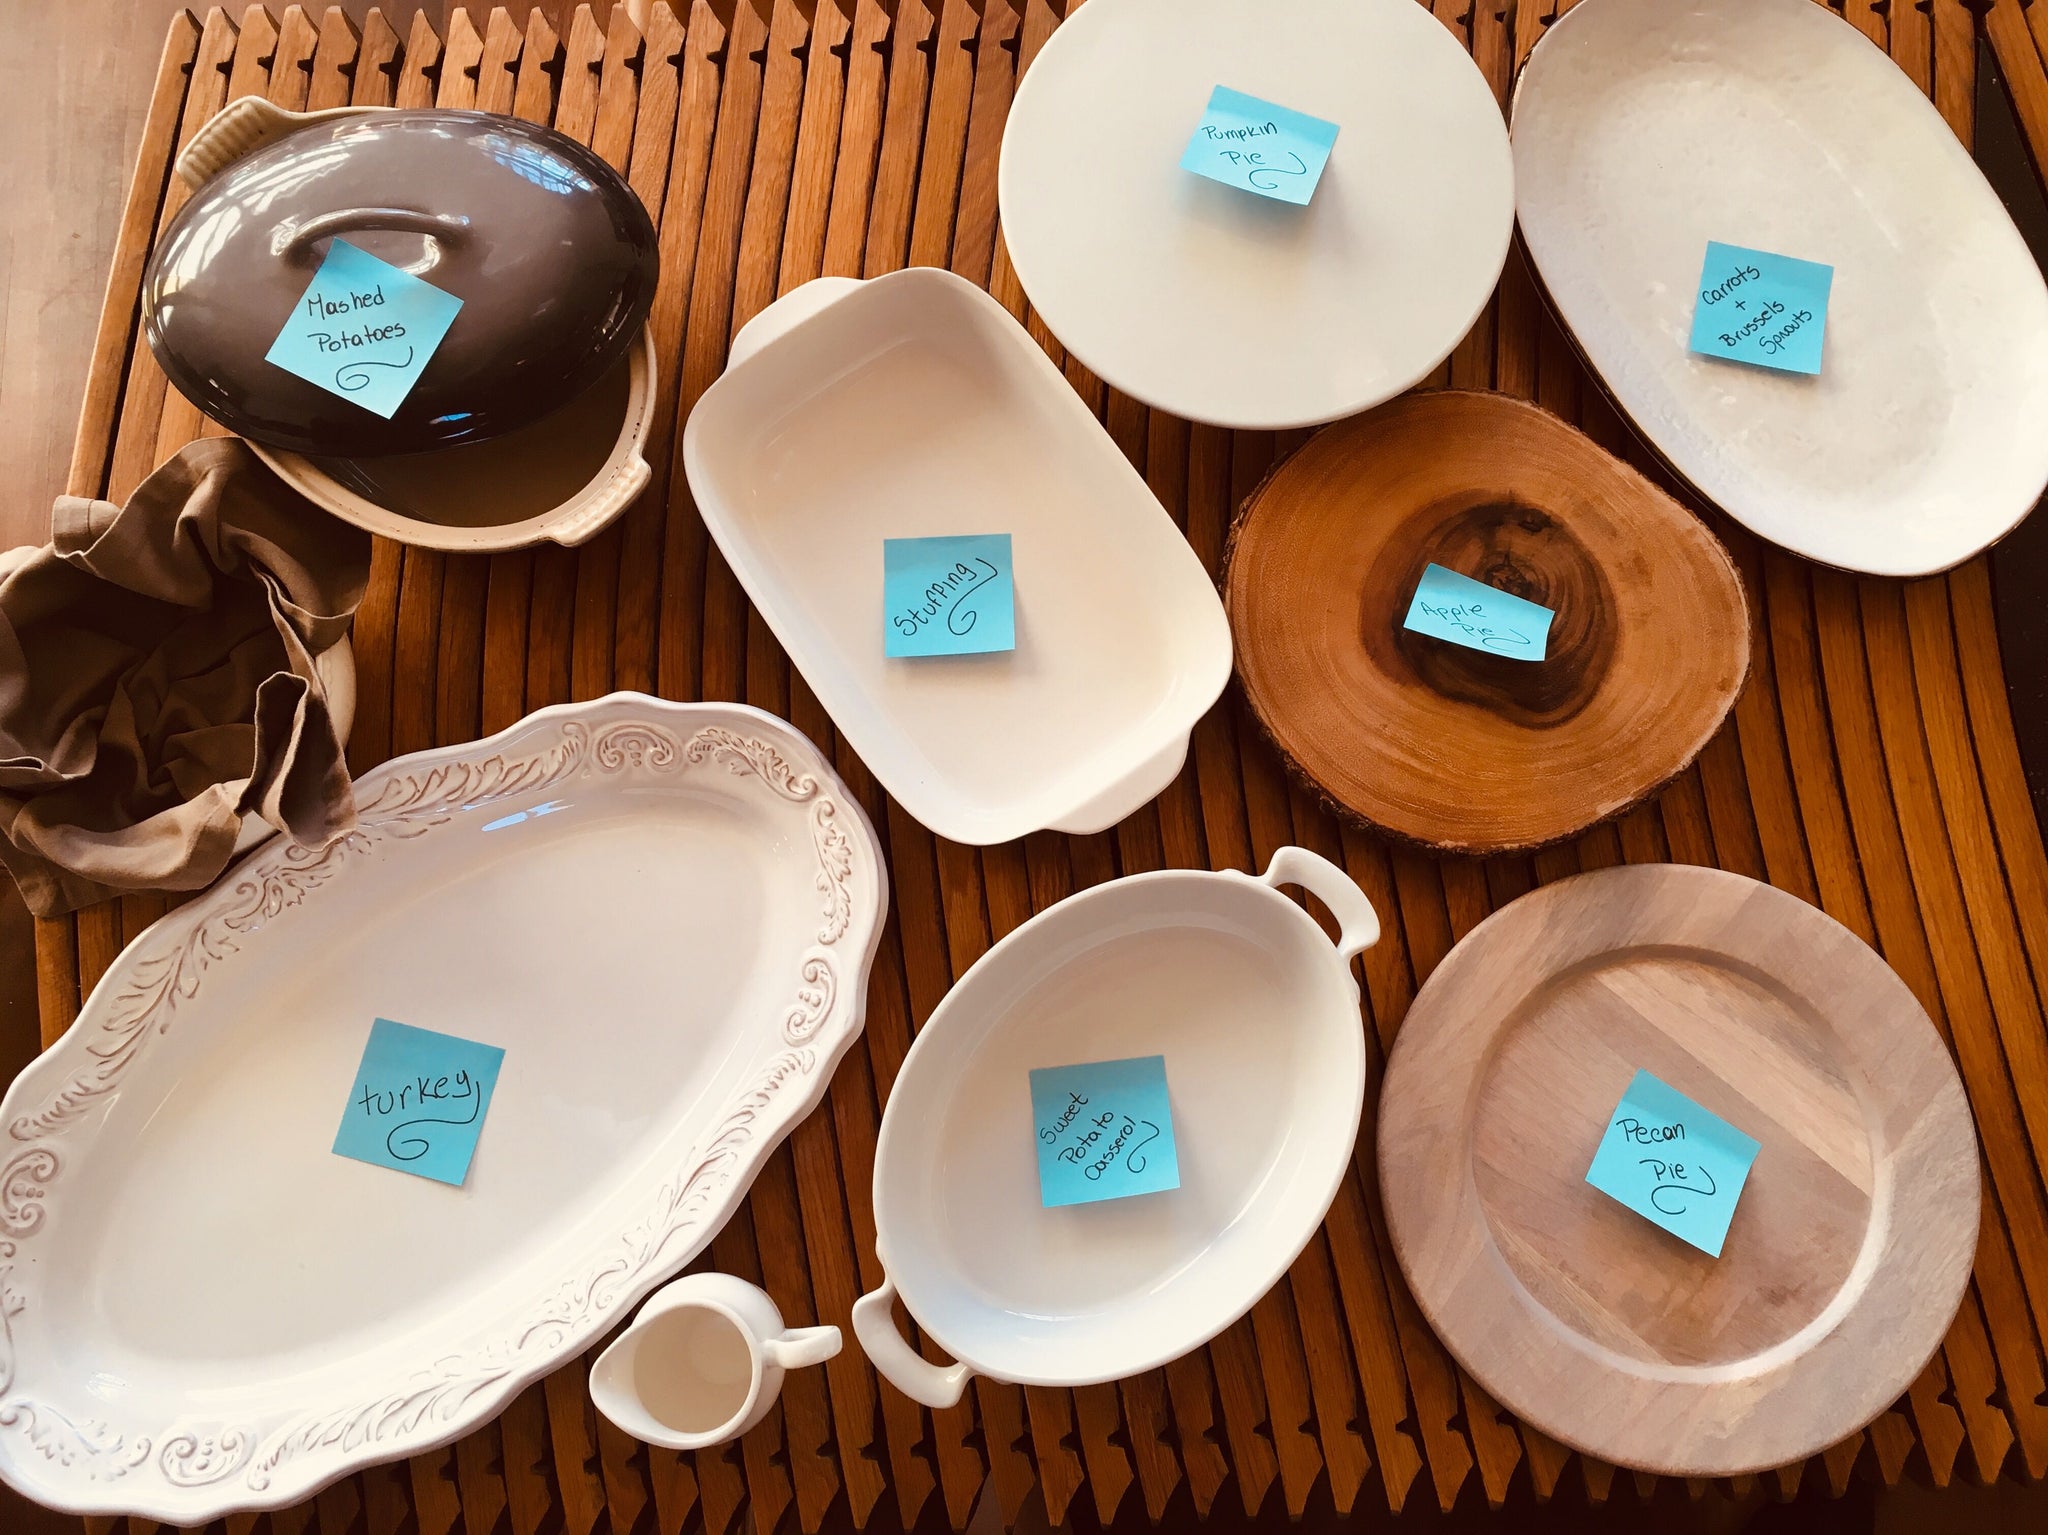 plates with notes